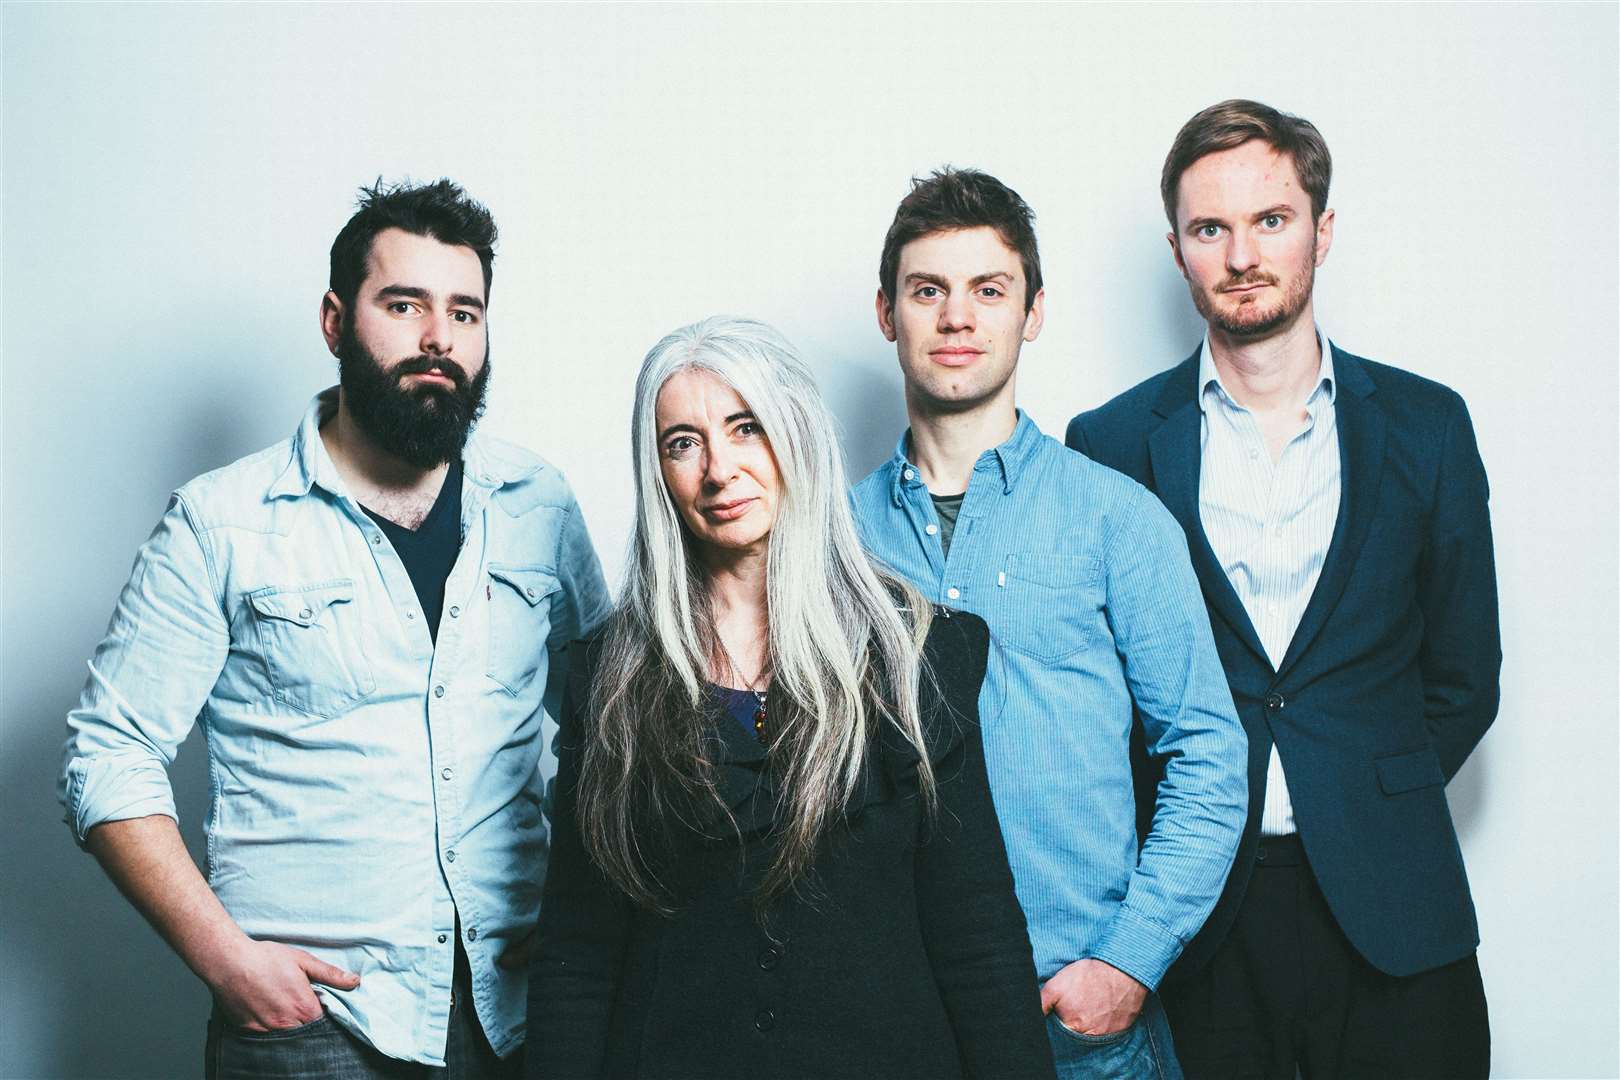 Grammy winner Dame Evelyn Glennie will be performing with Trio HLK at the Ramsgate Festival of Sound in July (11808654)